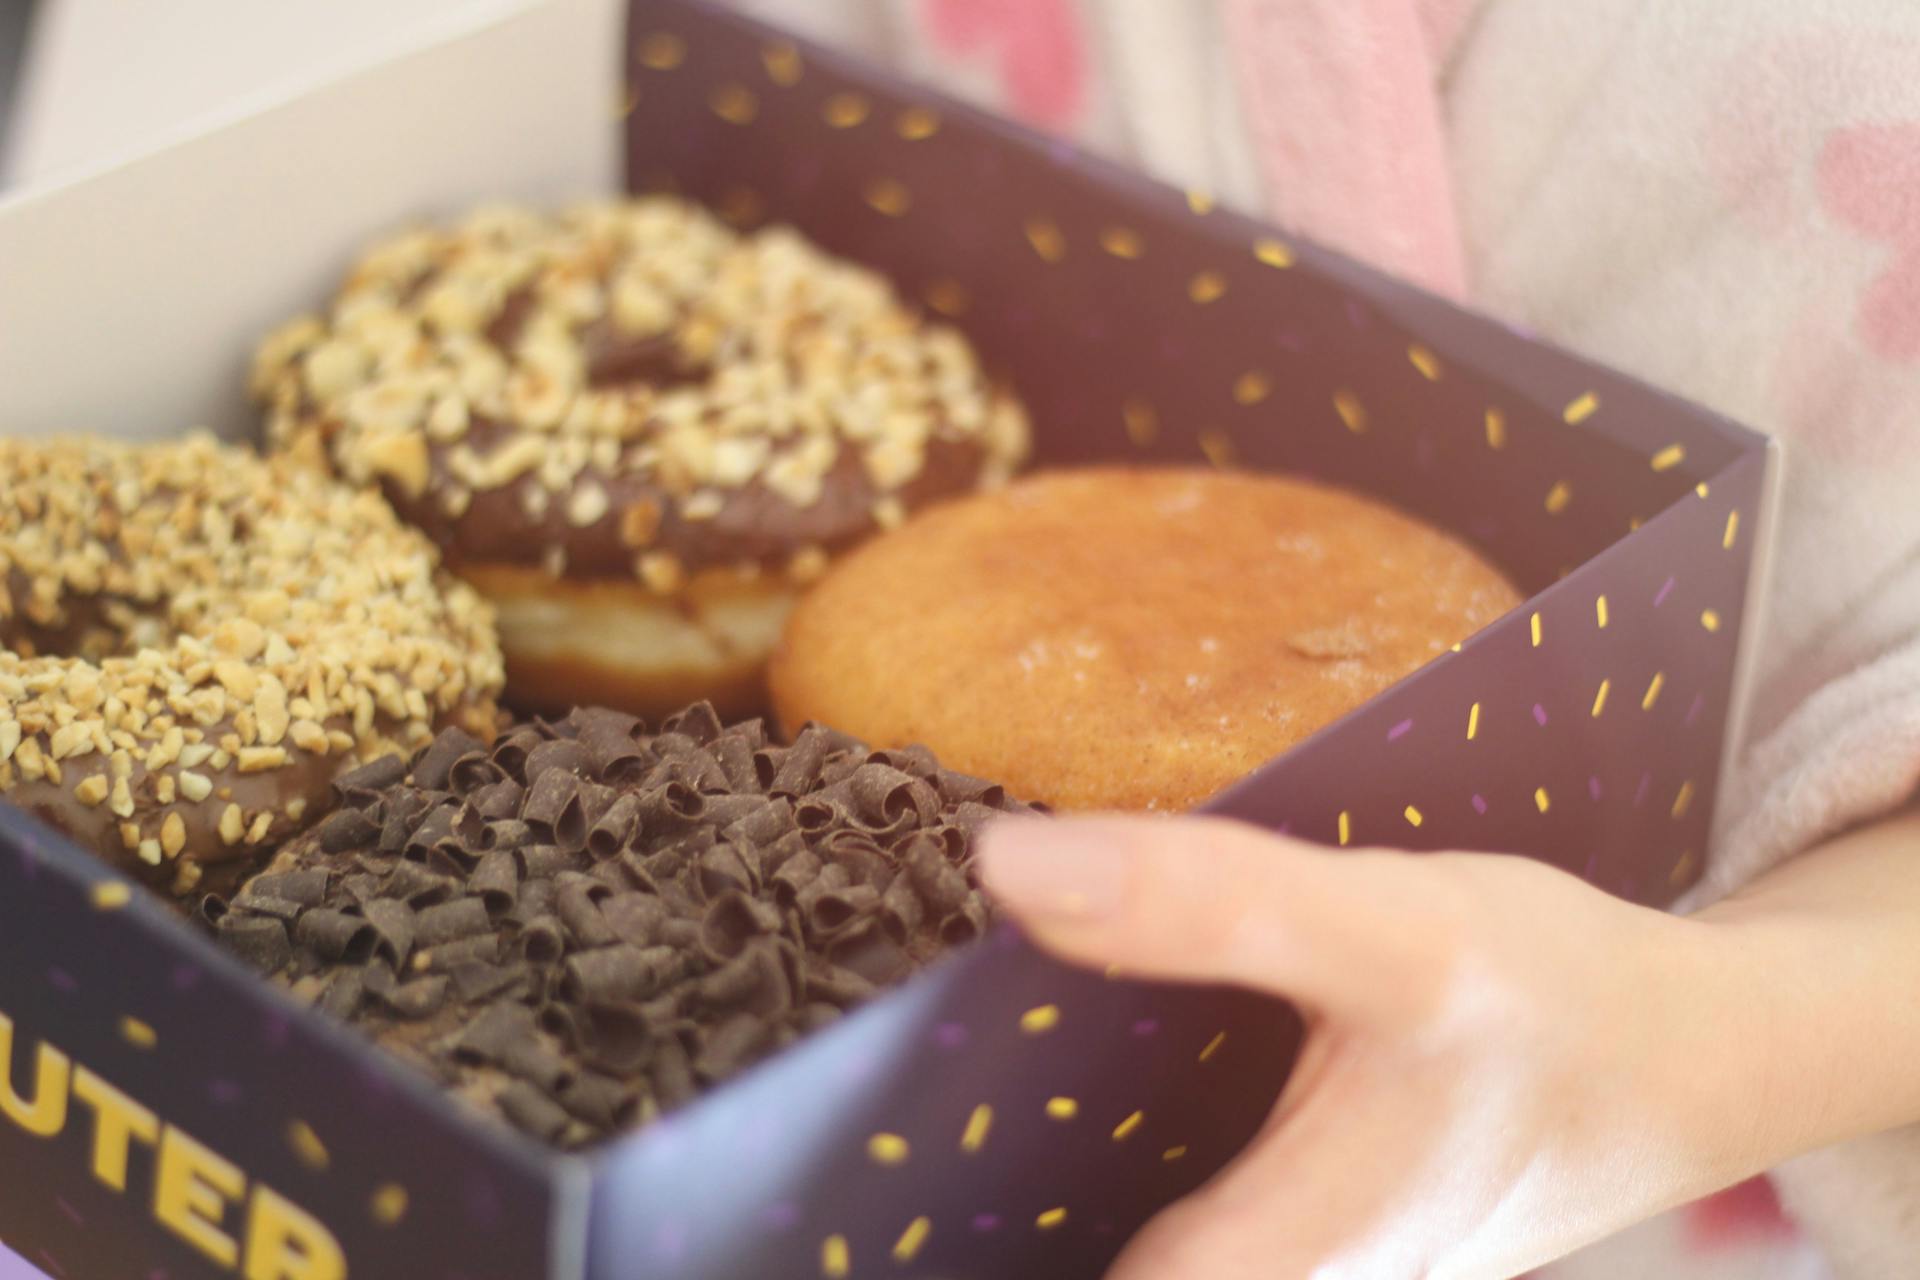 Person holding a box of donuts | Source: Pexels